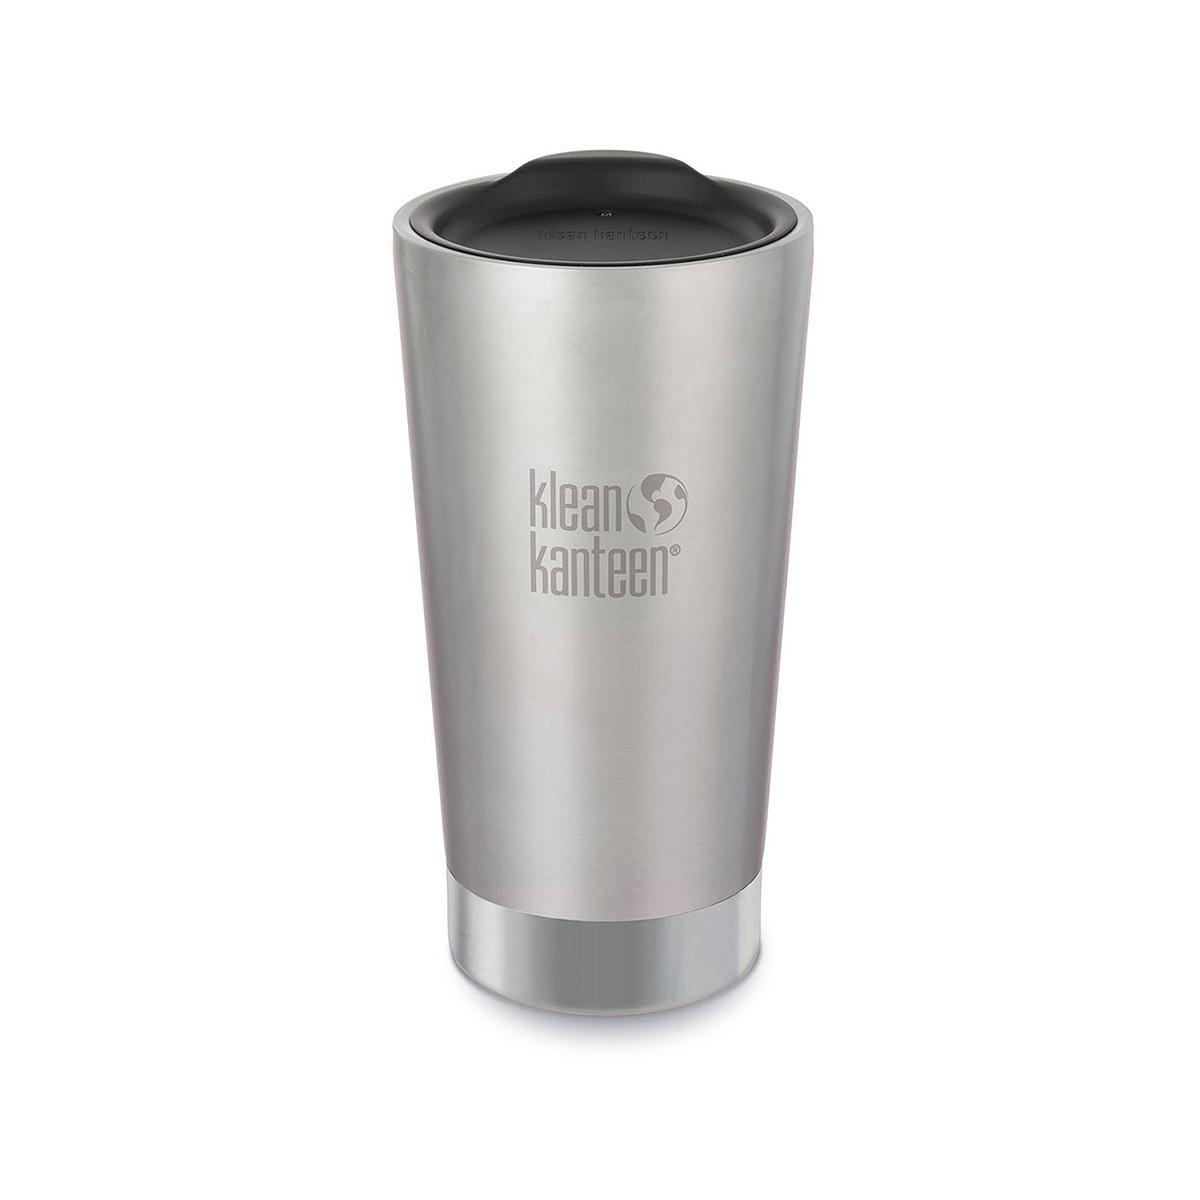 Bourbon Real Talk™ 10oz Insulated Stainless Steel Tumbler - Bourbon Real  Talk